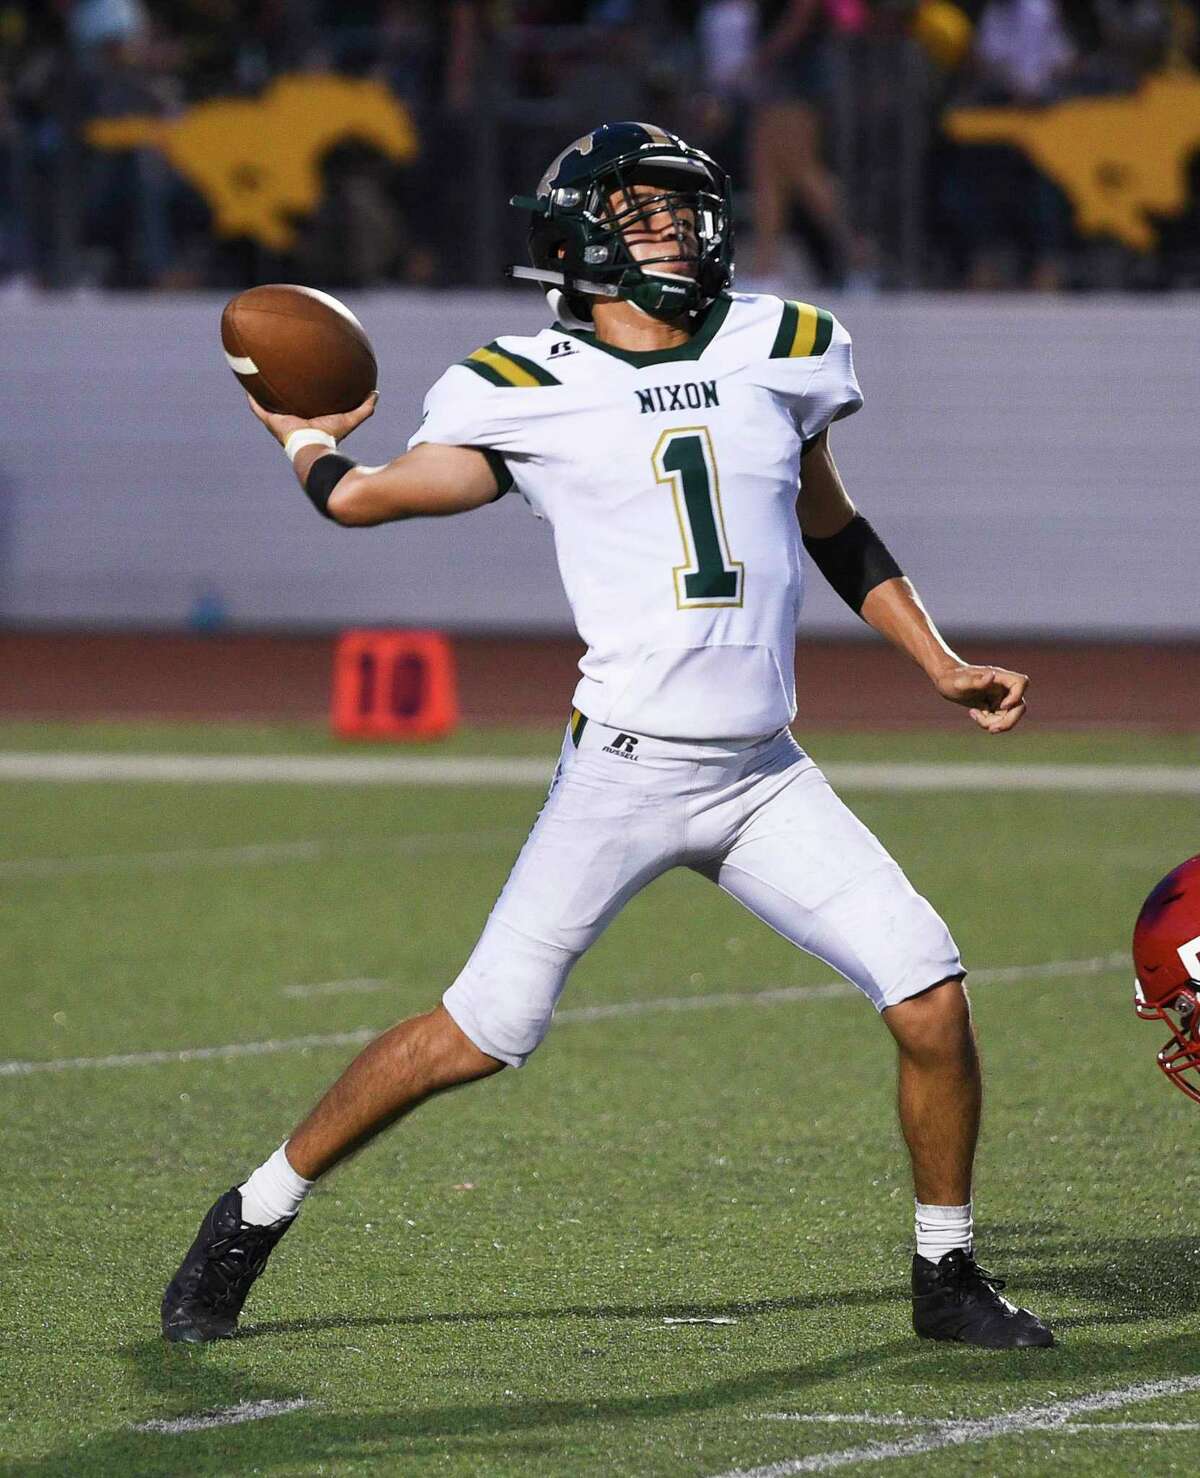 Austin Garcia hasn’t been just an athlete in the run-heavy Slot-T offense, the Nixon QB has shown an ability to throw the ball as well for a 4-0 Mustangs squad.